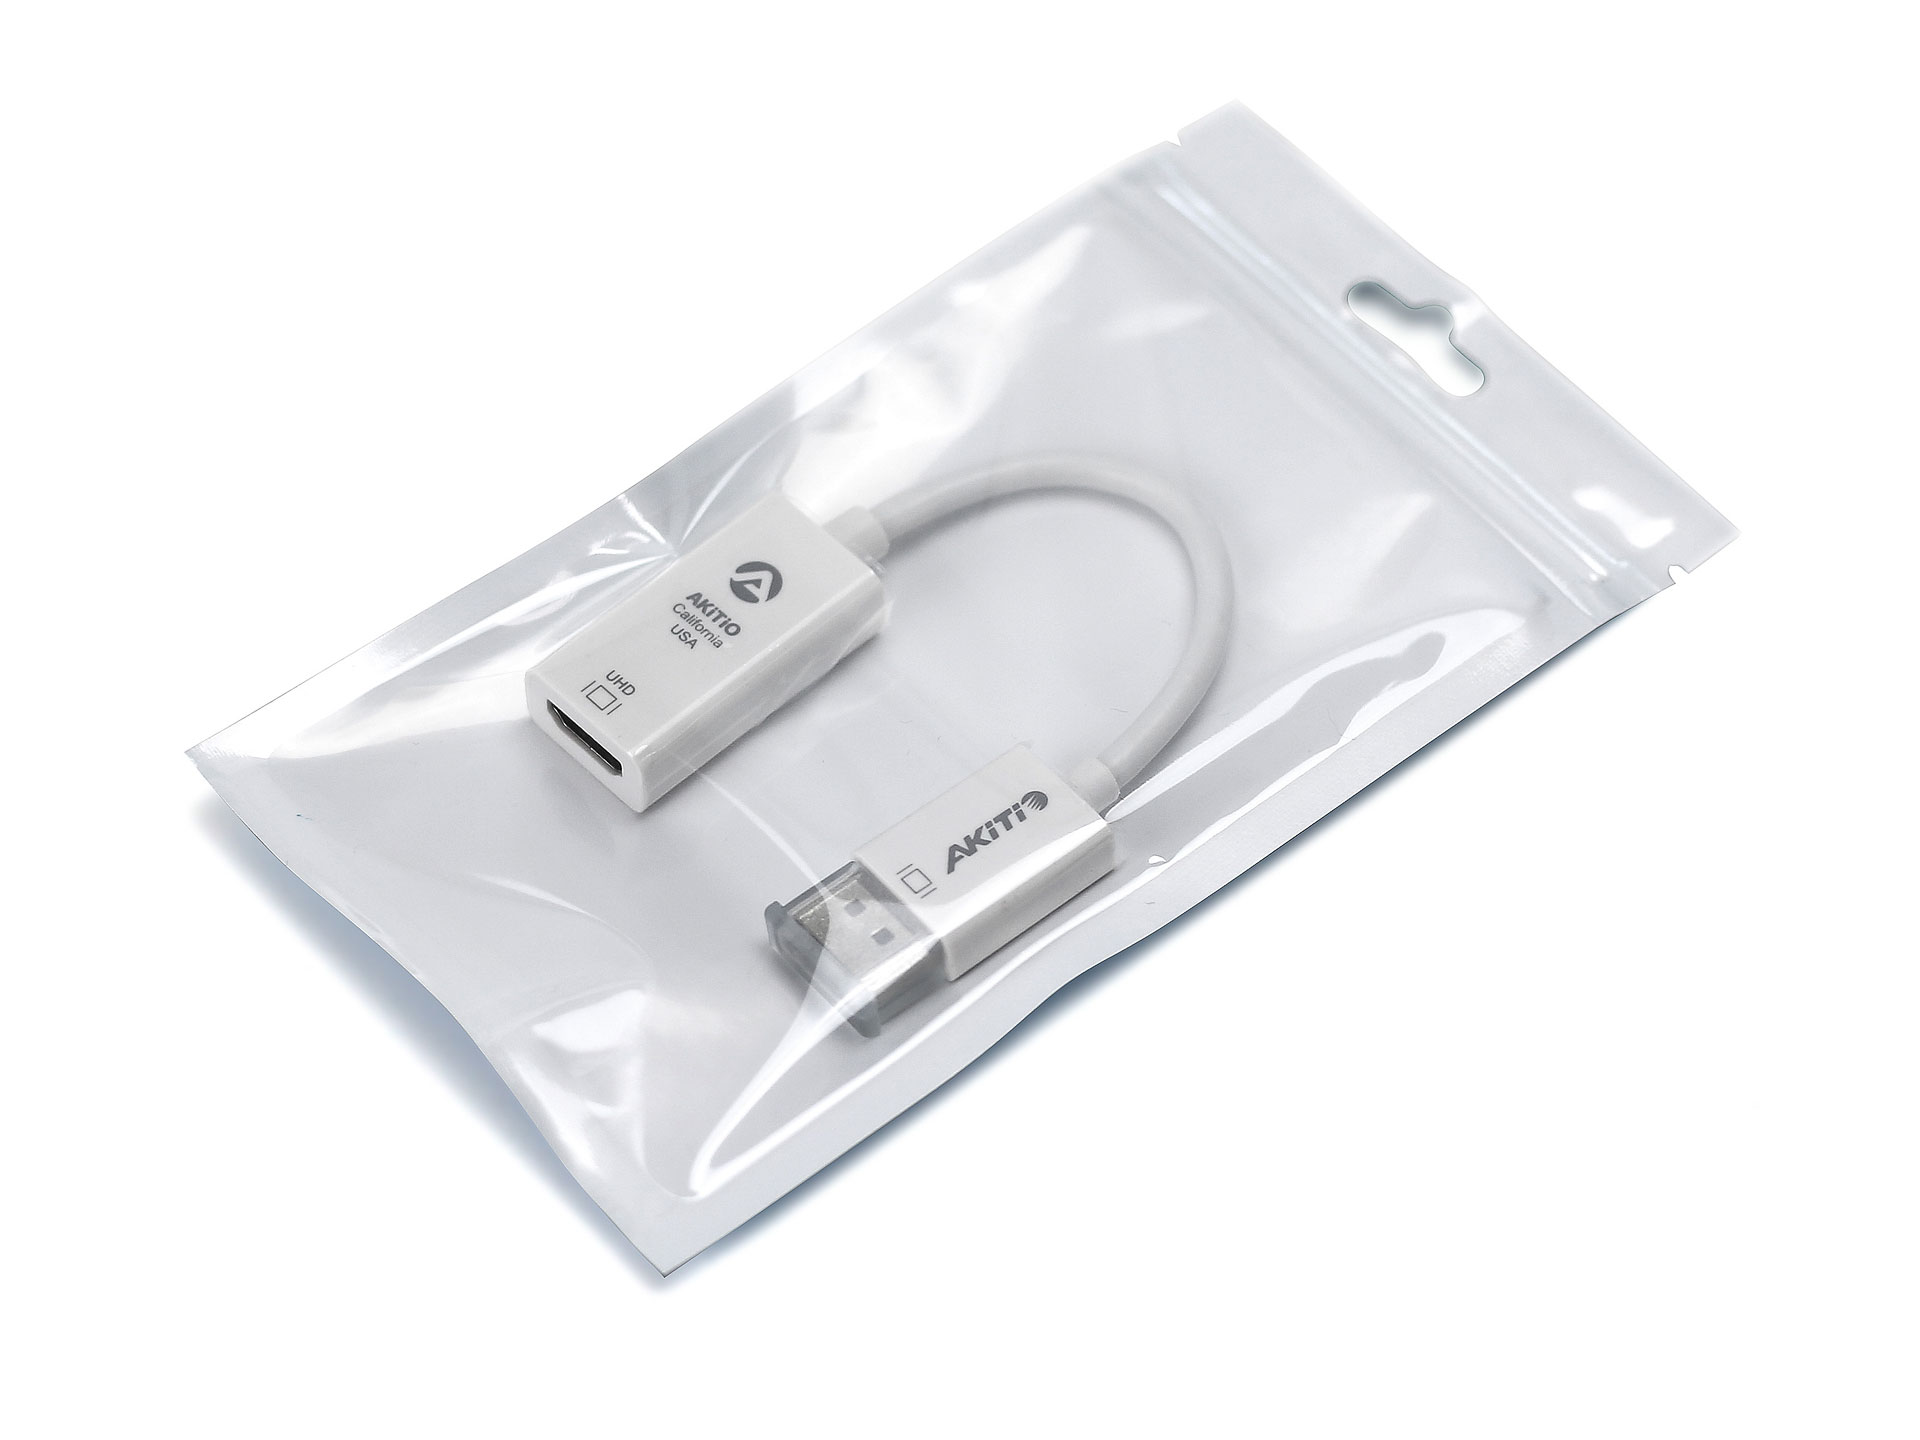 DisplayPort to HDMI Cable 2.0 - DP to HDMI Adapter - Active